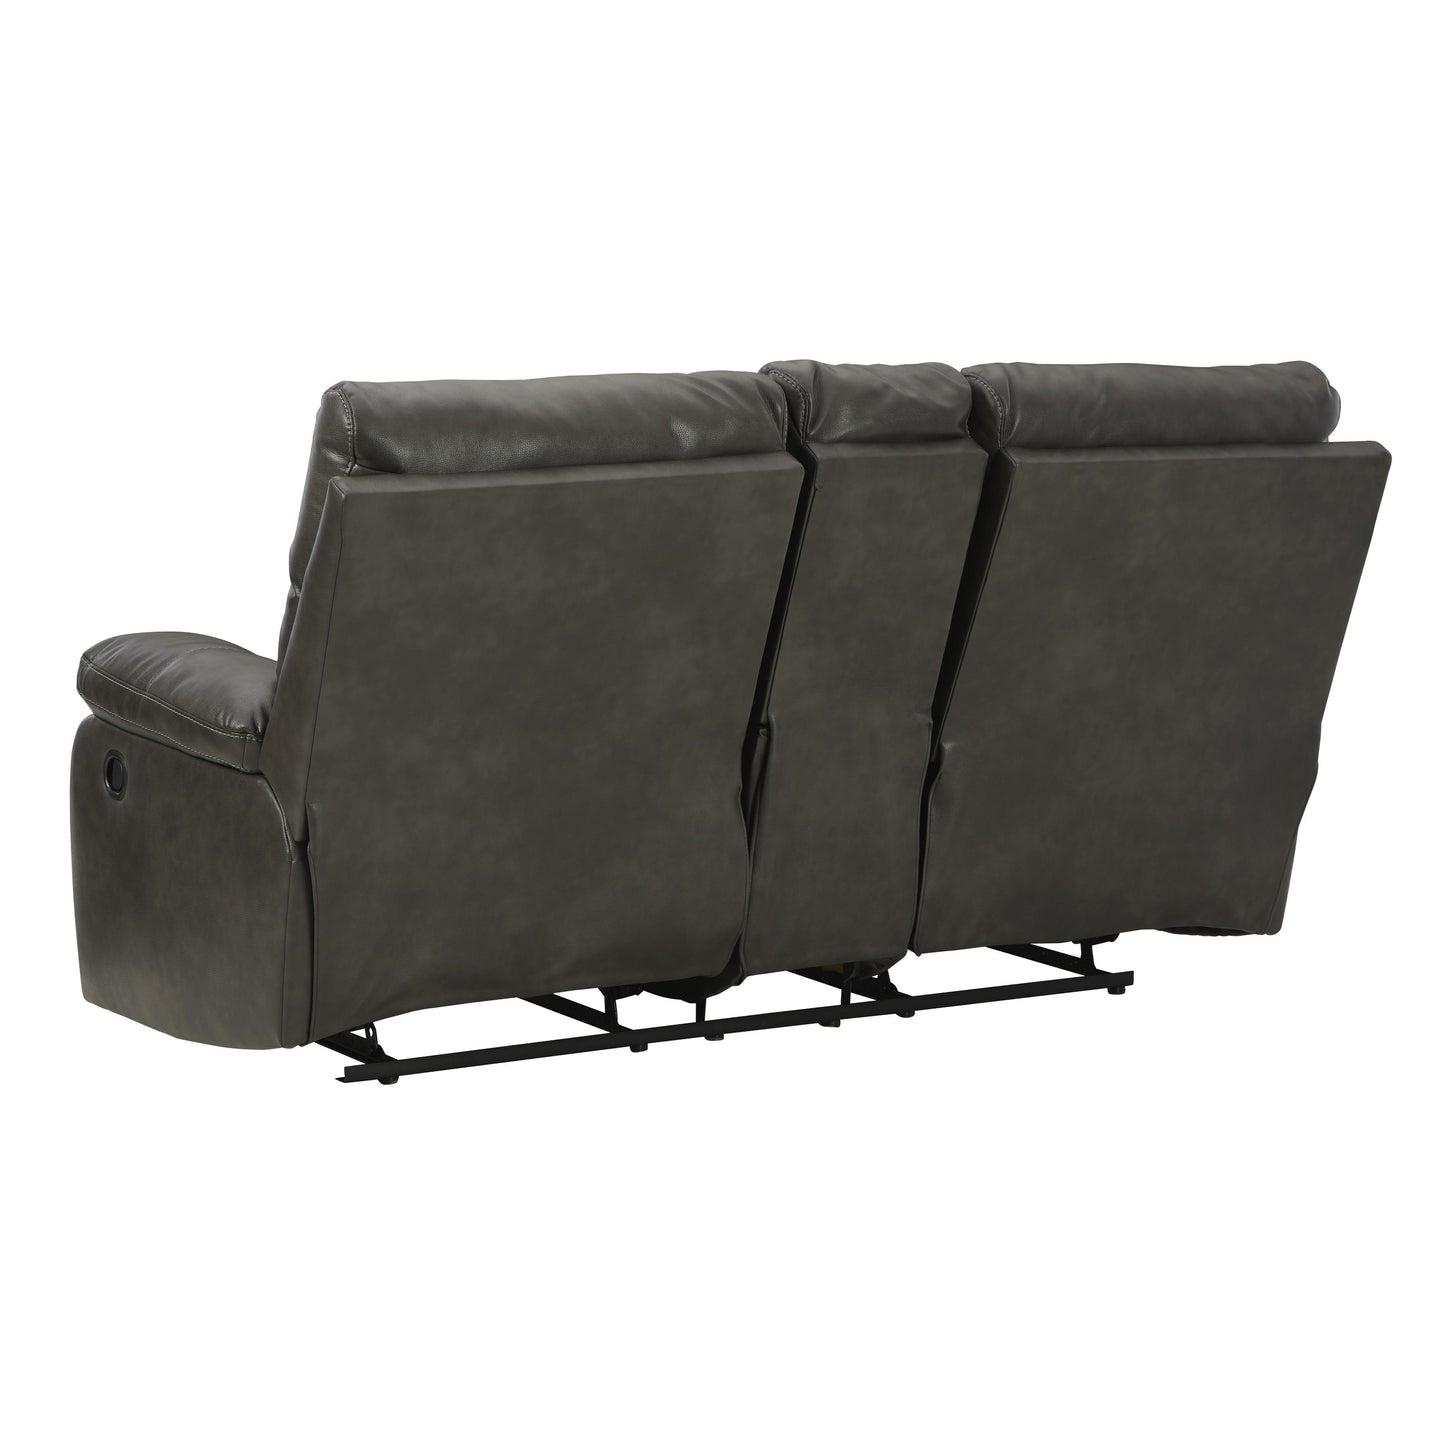 Signature Design by Ashley Willamen Power Reclining Leather Look Loveseat 1480194 IMAGE 4